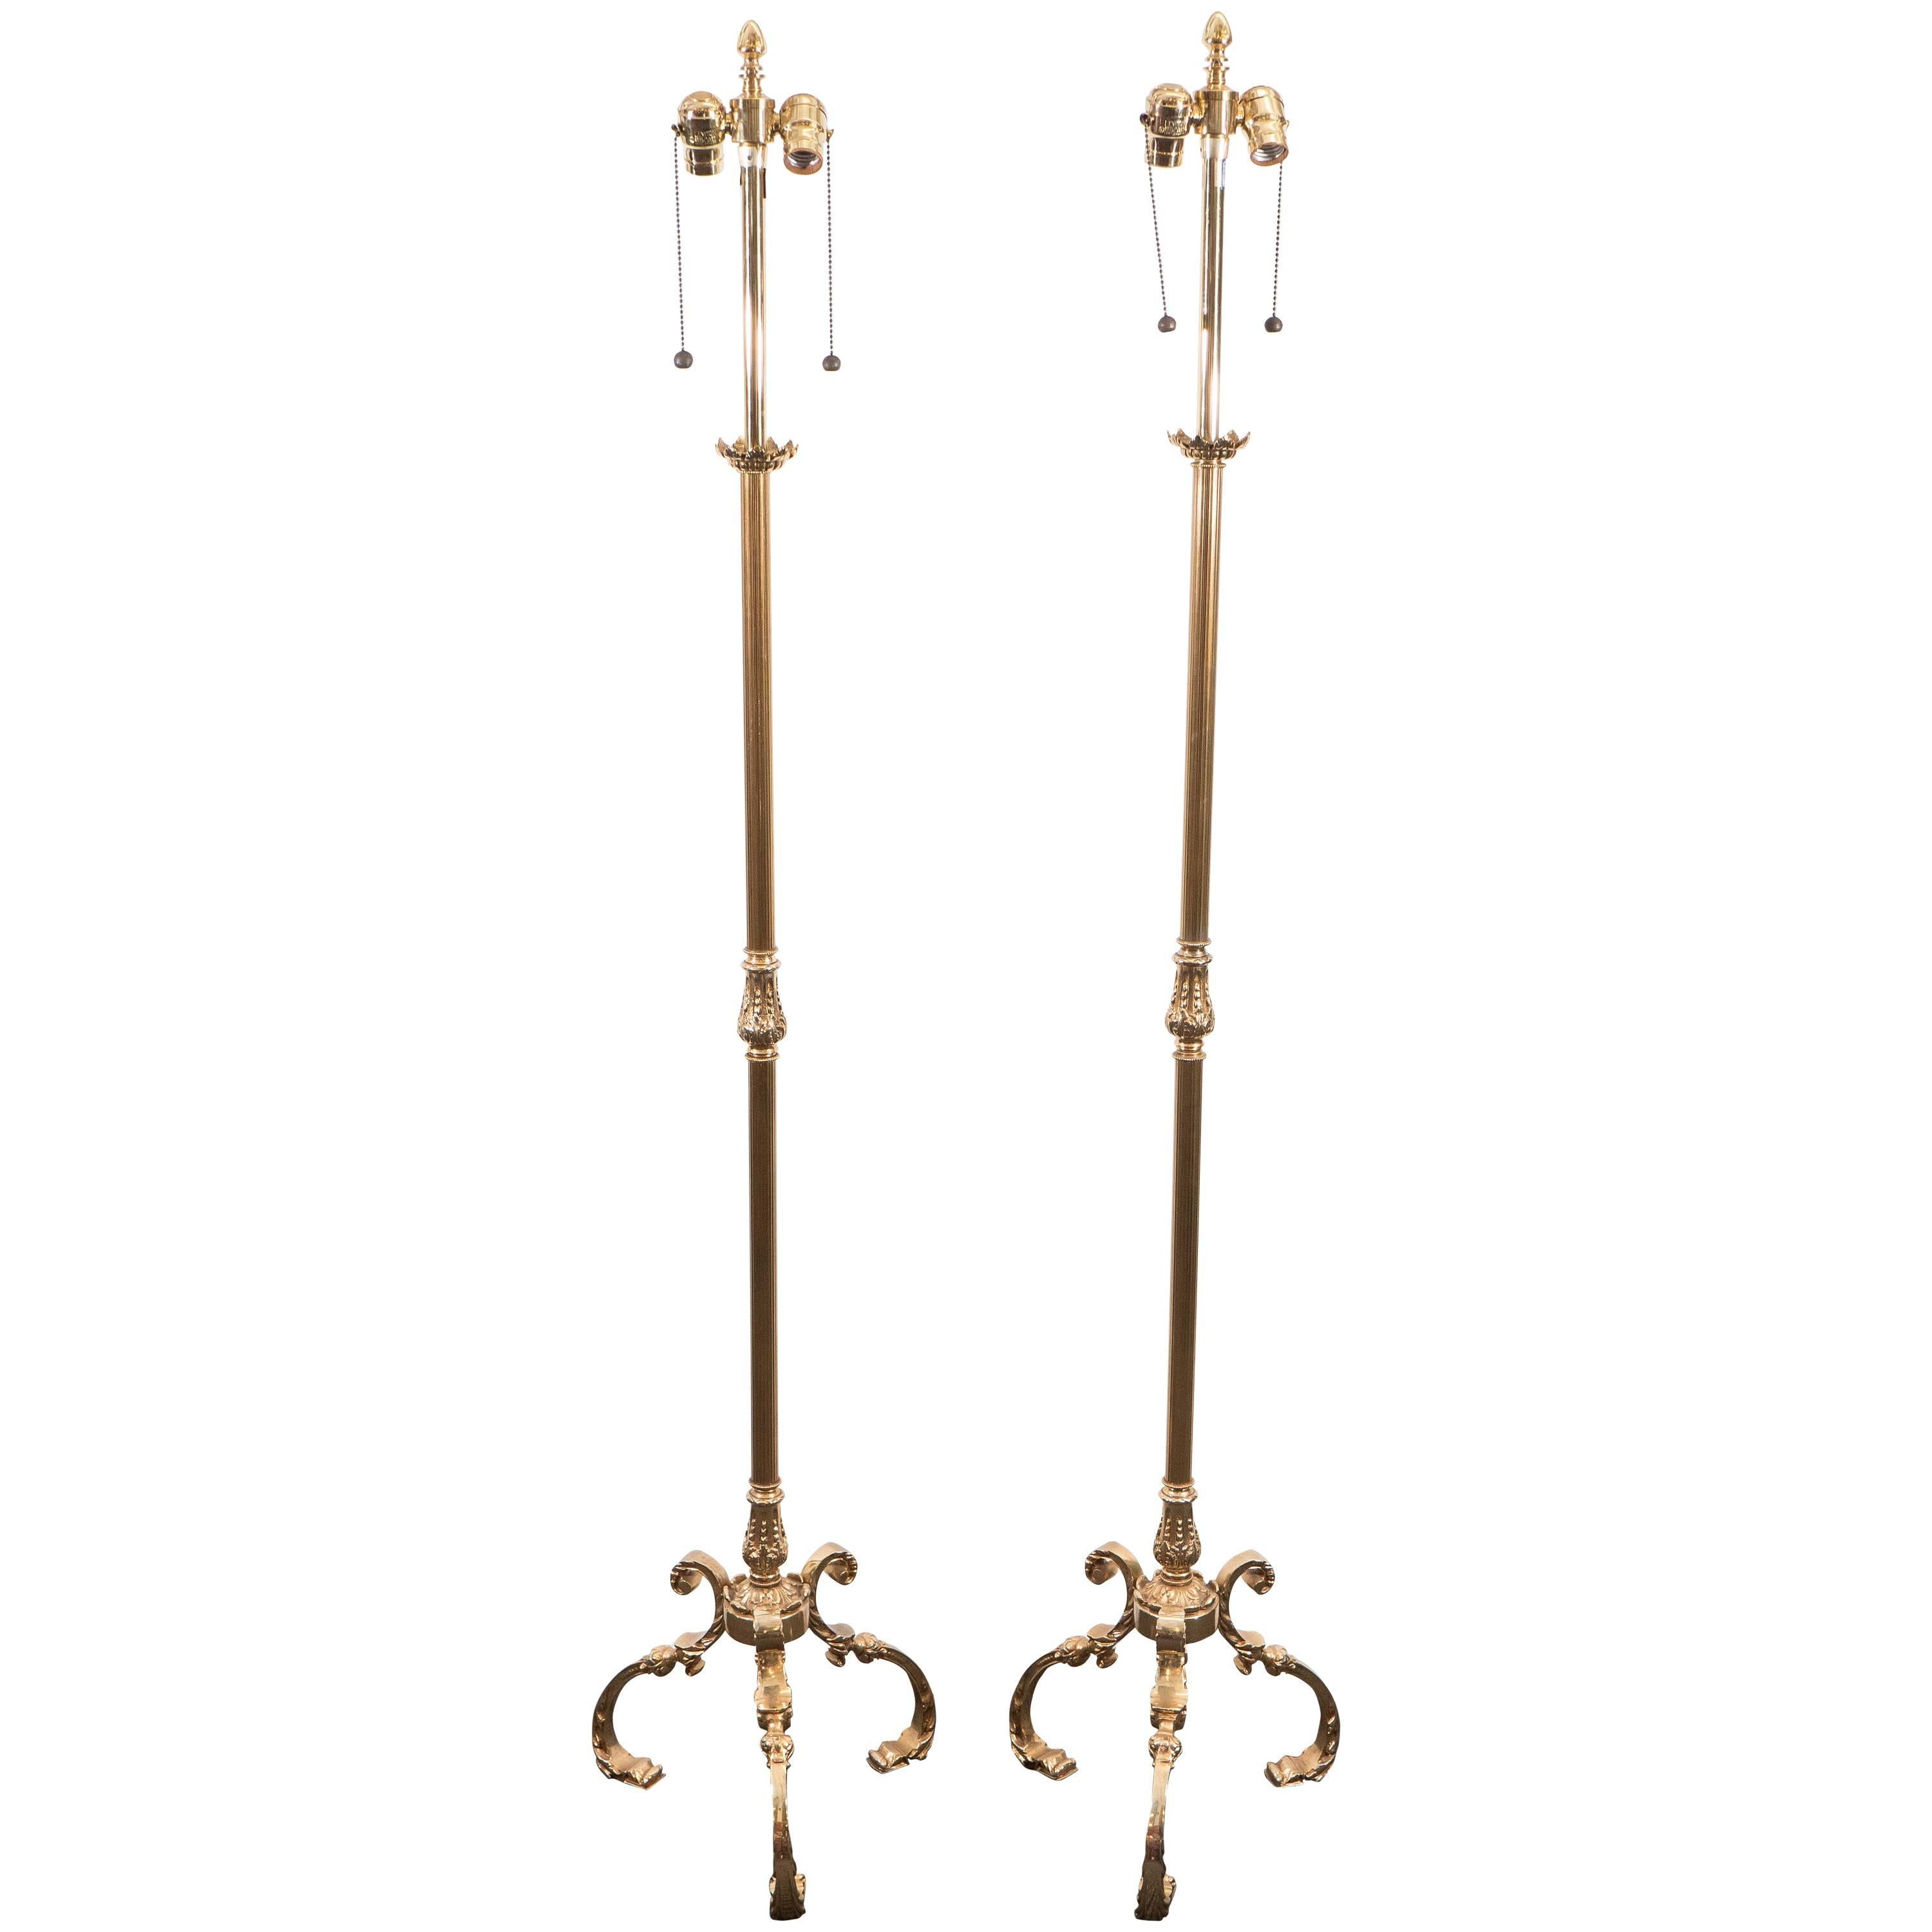 Pair of Midcentury Brass Floor Lamps by Marbro Lamp Company